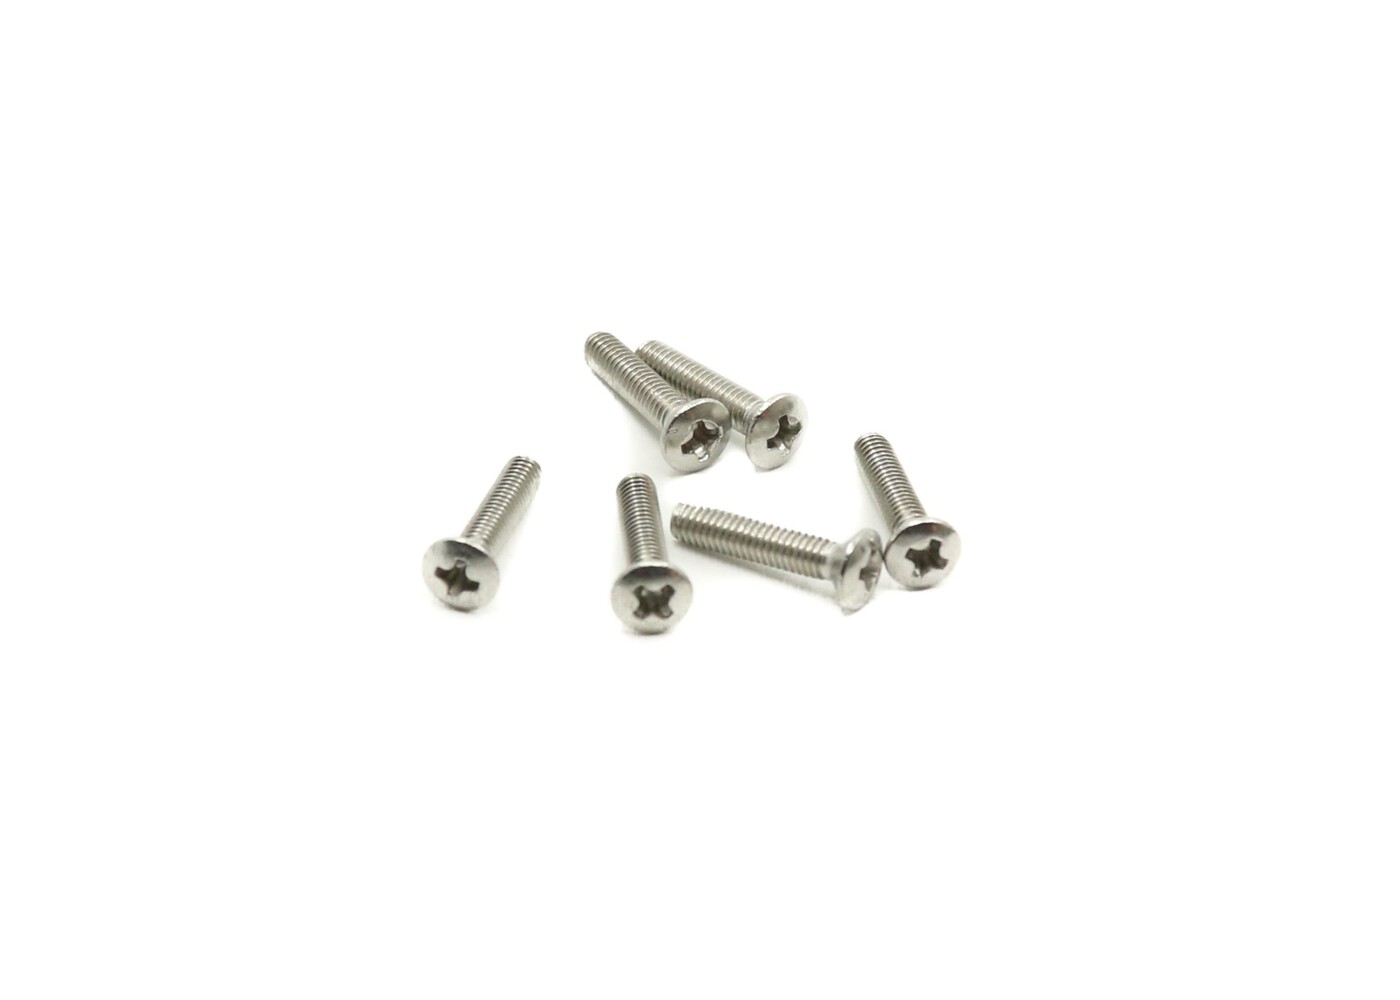 MannMade USA MannMade USA Tuner Button Screw, Short - Stainless Steel